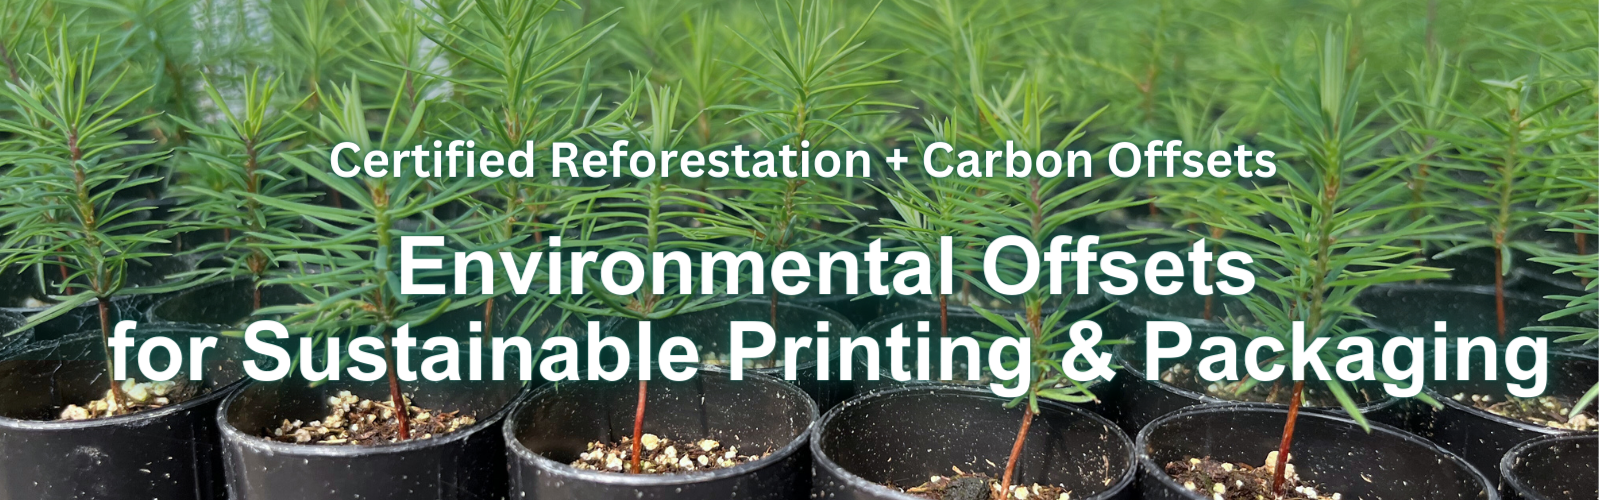 Replant Forests While You Print (800 × 924 px) (1600 × 500 px)-2